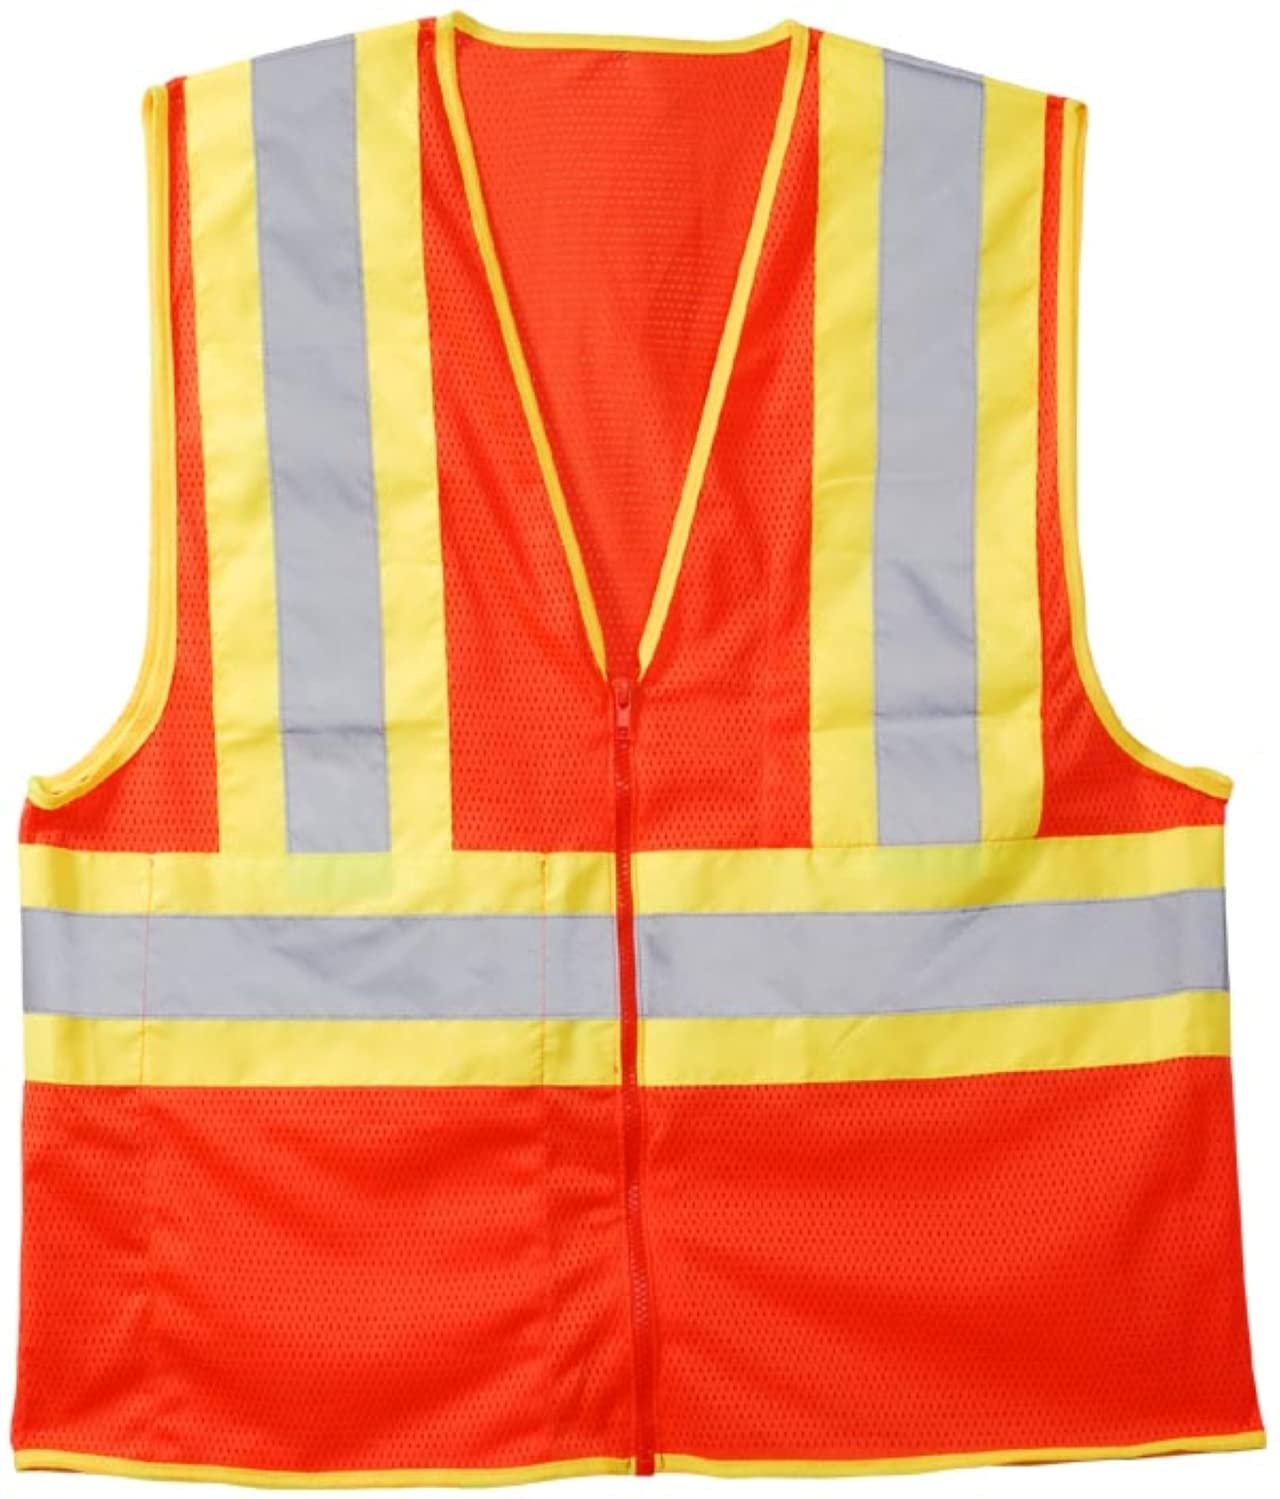 Type R, Class 2 High-Visibility Mesh Safety Vest, Contrasting Tape